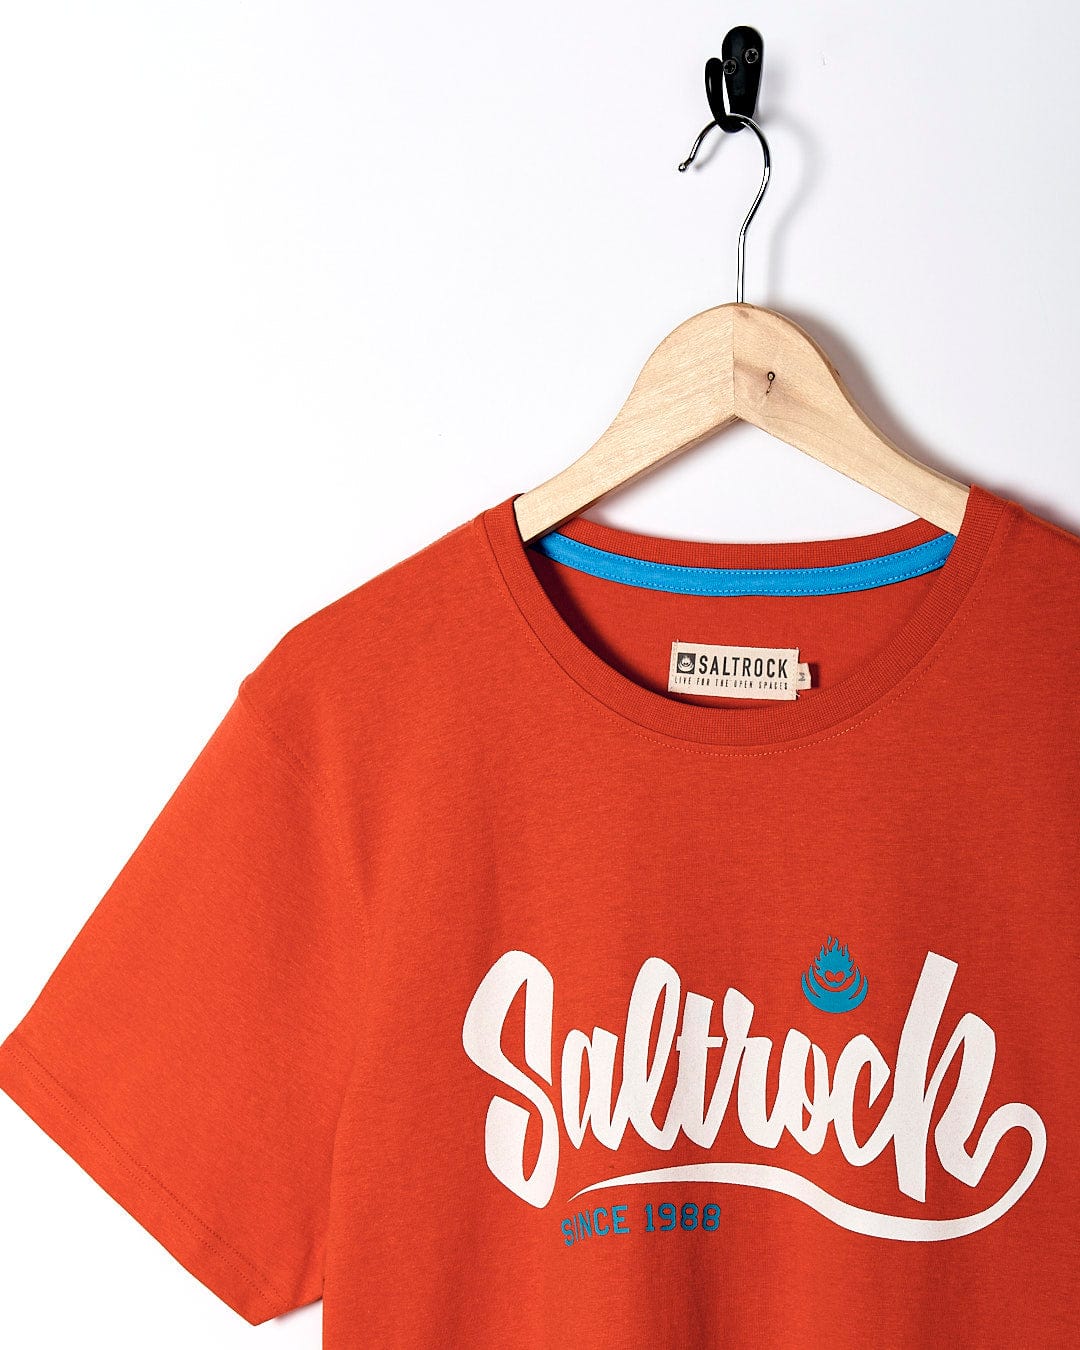 A Speed - Mens Short Sleeve T-Shirt - Red with the brand name Saltrock on it.